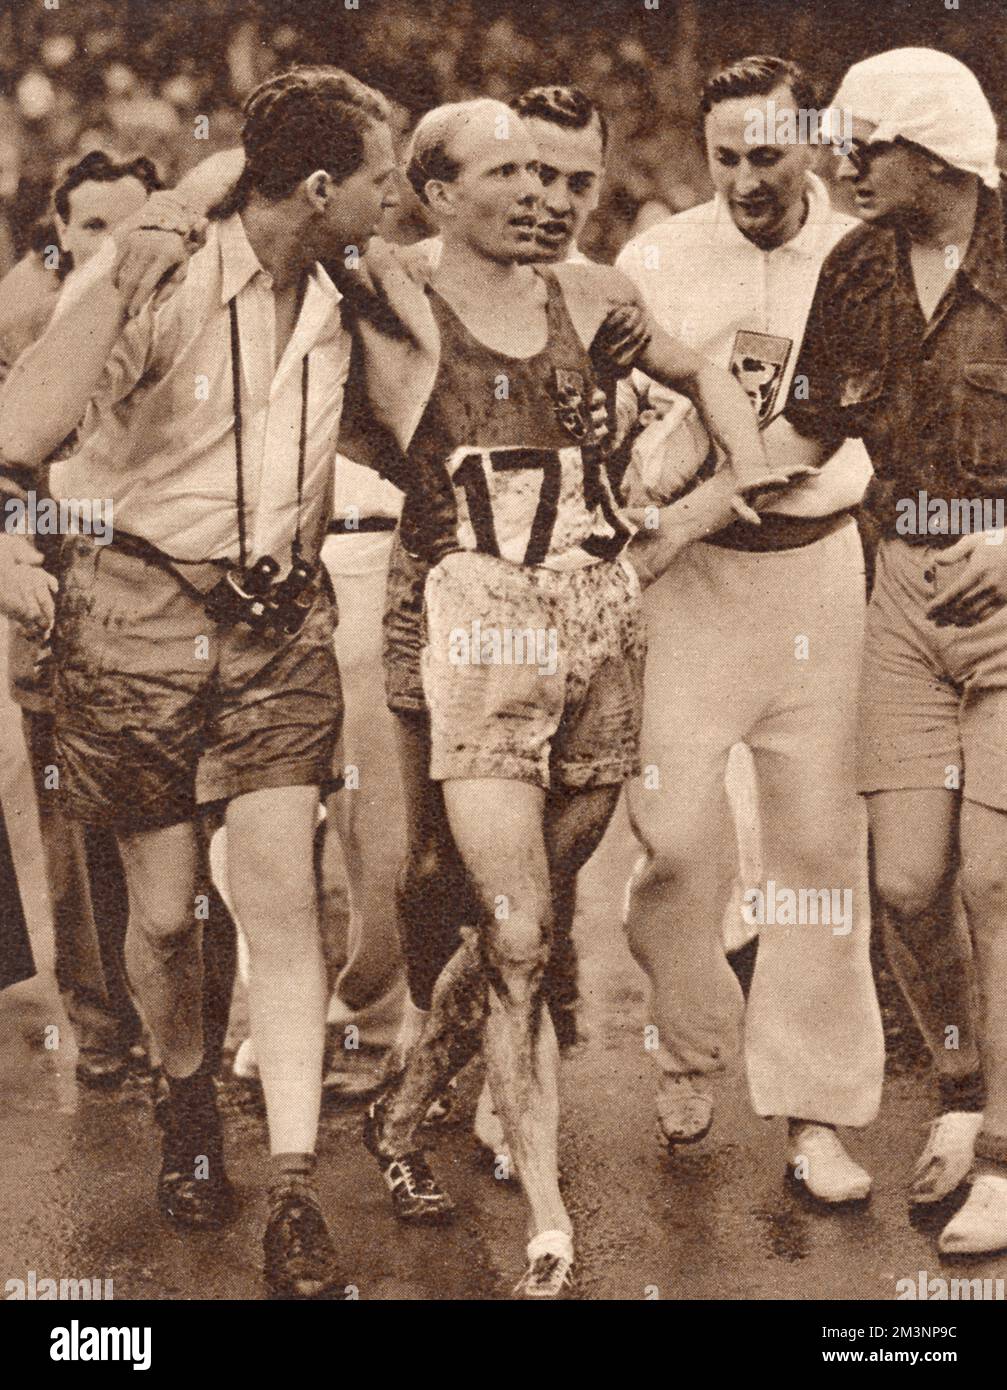 Belgian long-distance runner Reiff managed to snatch the lead from the Czech competitor Zatopek with three laps to go, to win the 5,000 metres at 1984 London Olympic Games.      Date: 1948 Stock Photo